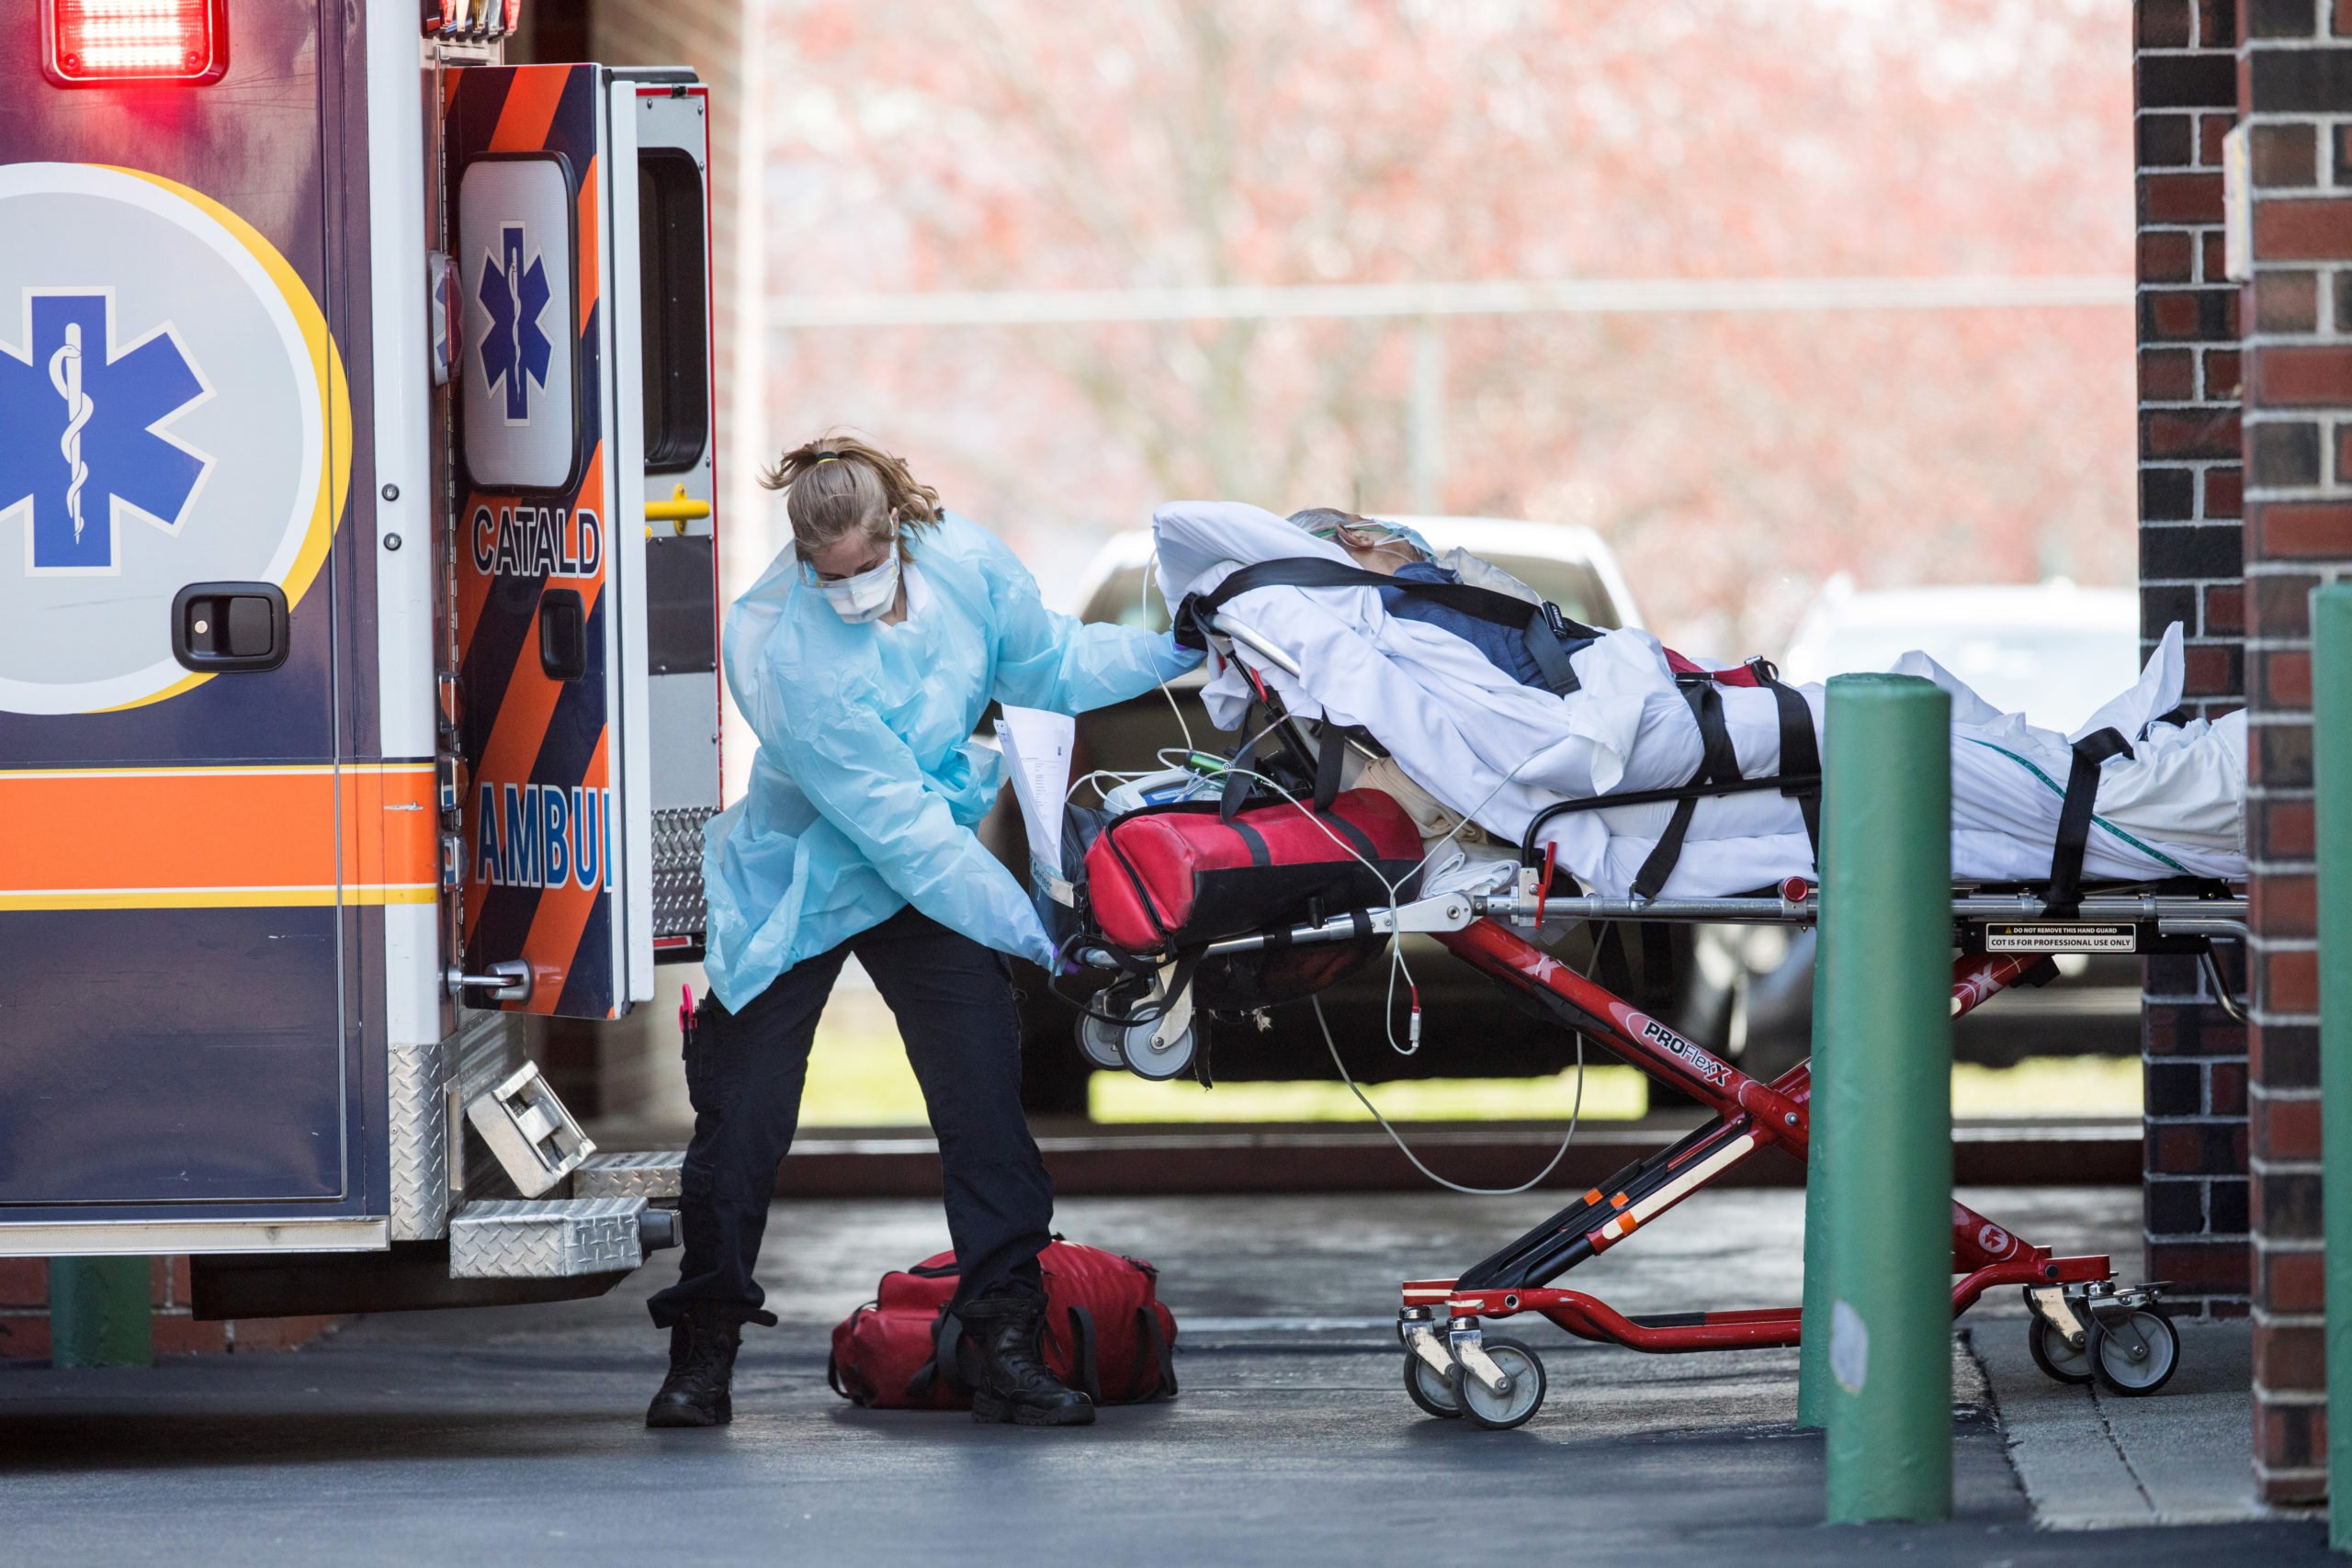 First responders load a patient into an ambulance from a nursing home where multiple people have contracted COID-19 on April 17, 2020 in Chelsea, Massachusetts. (Photo by Scott Eisen/Getty Images)